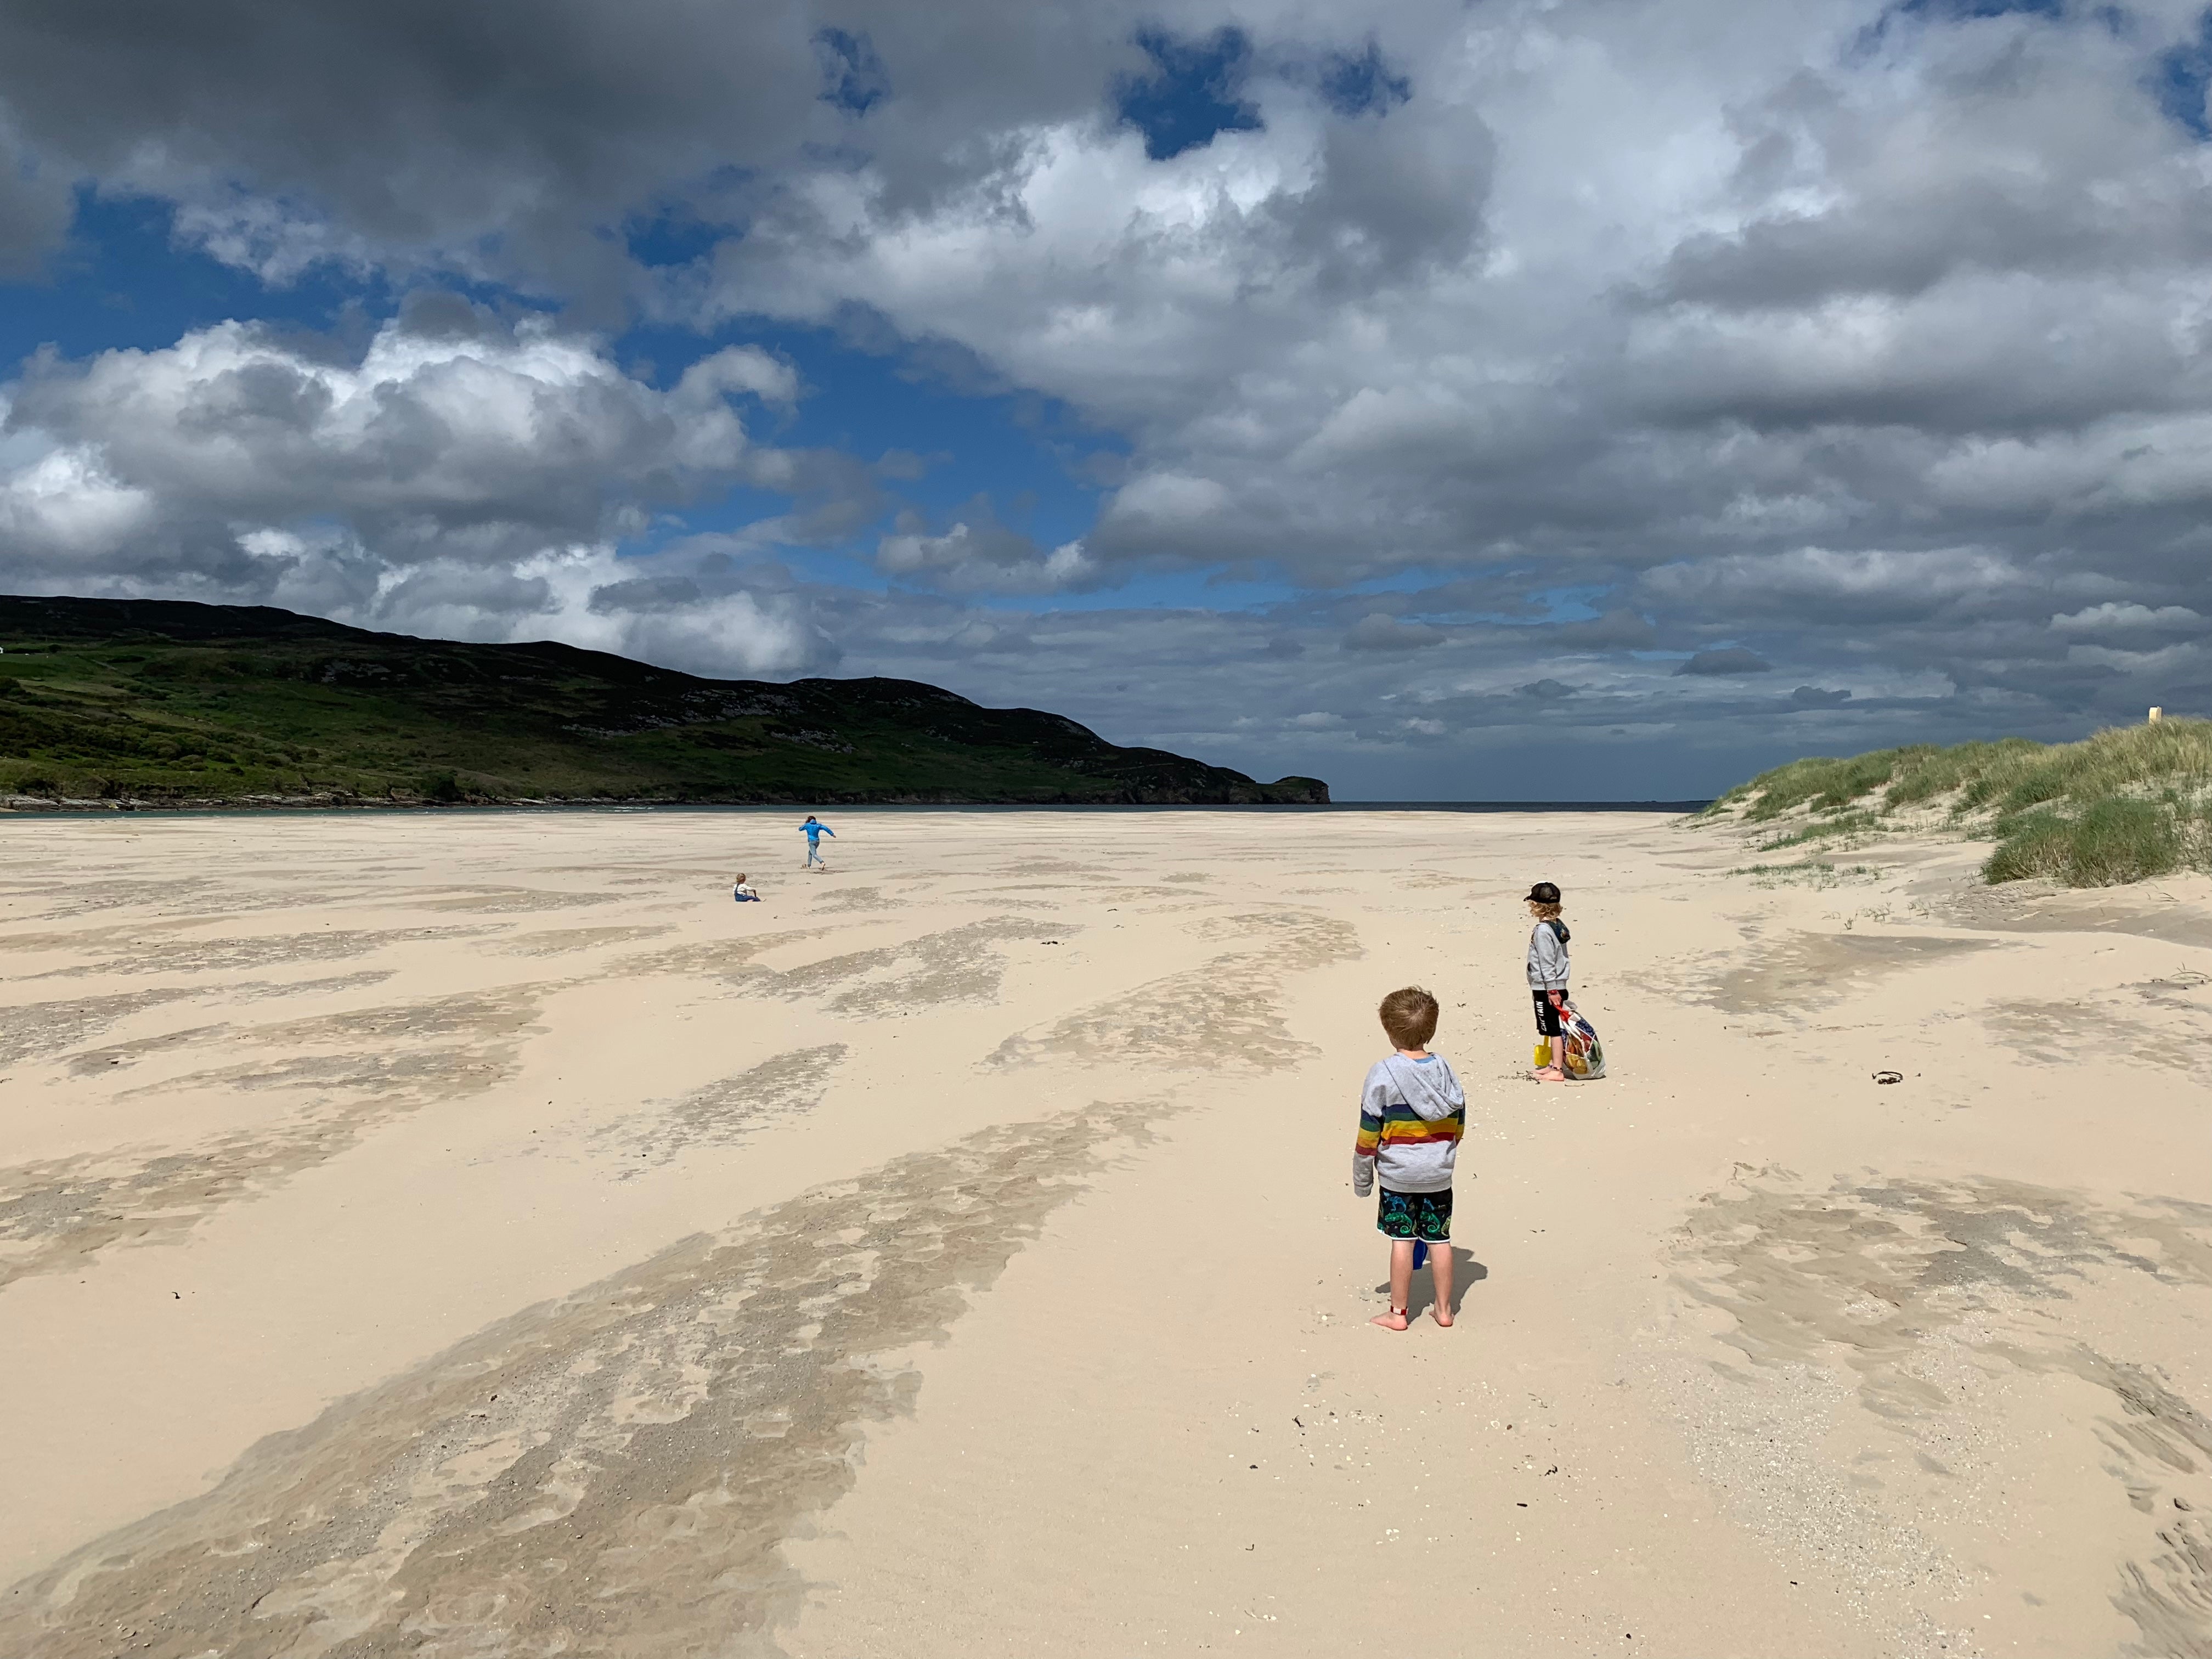 Little members of the SteamLine family on a road-trip to Donegal, a beloved destination on Ireland's northernmost coast.